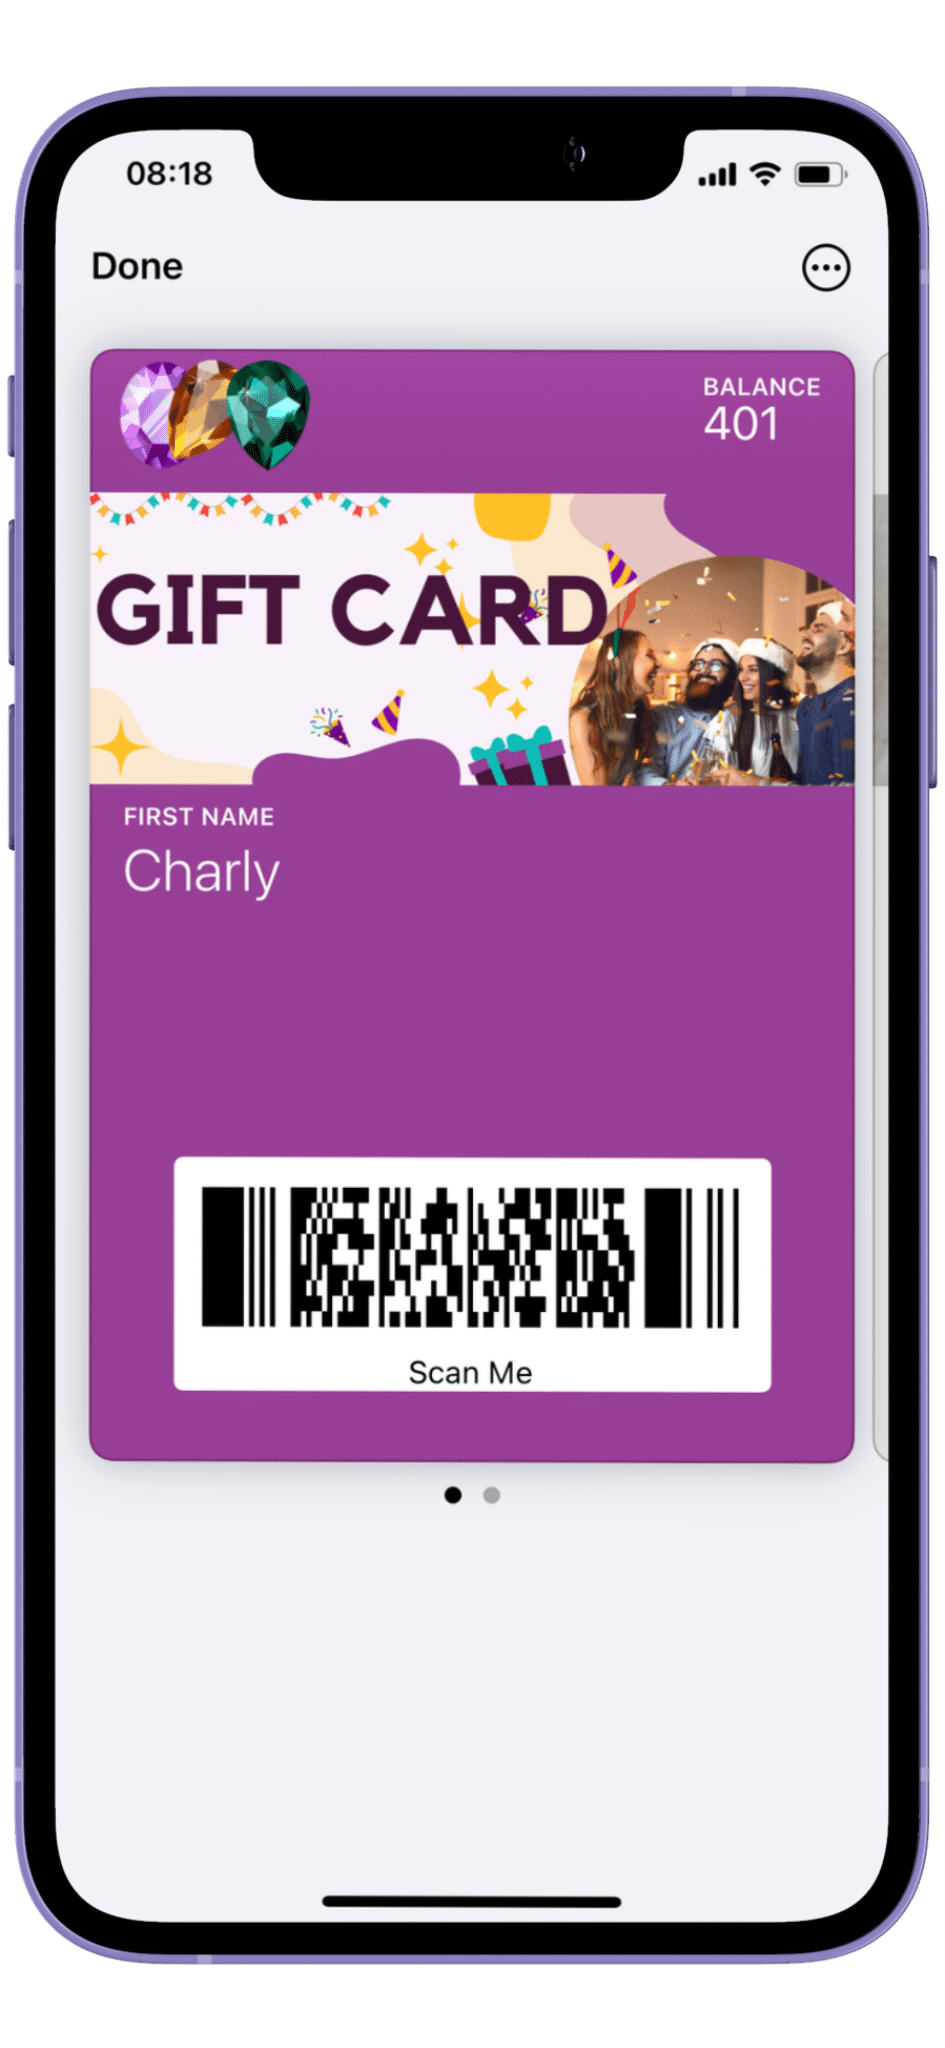 A digital loyalty card with the name "charly" displayed on a smartphone screen.